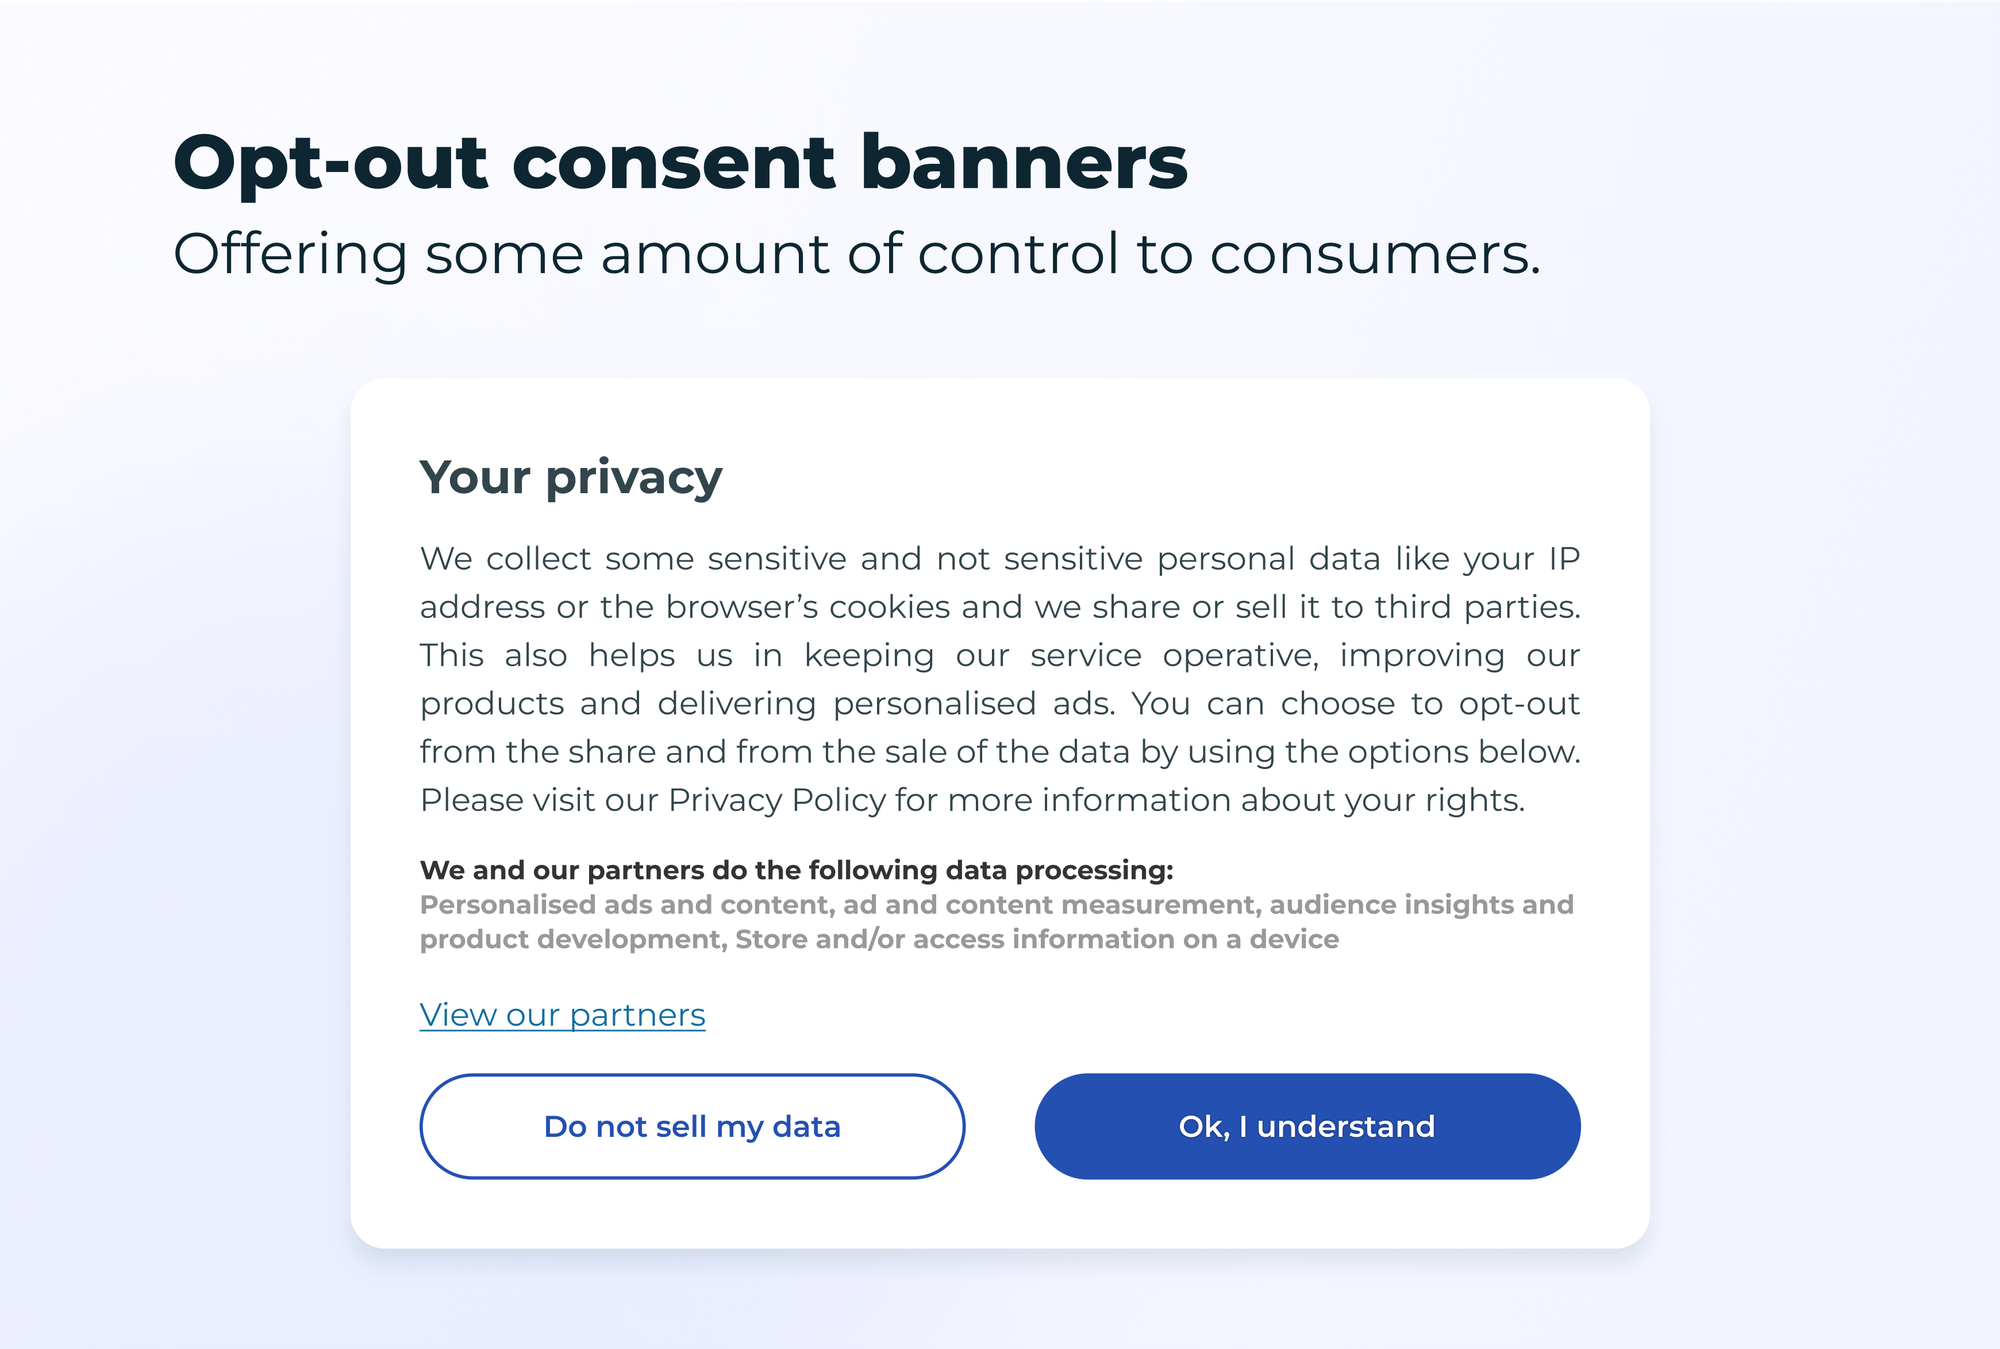 A mockup of an opt-out consent banner, with the title "opt-out consent banners" and the subtitle "Offering some amount of controls to consumers"